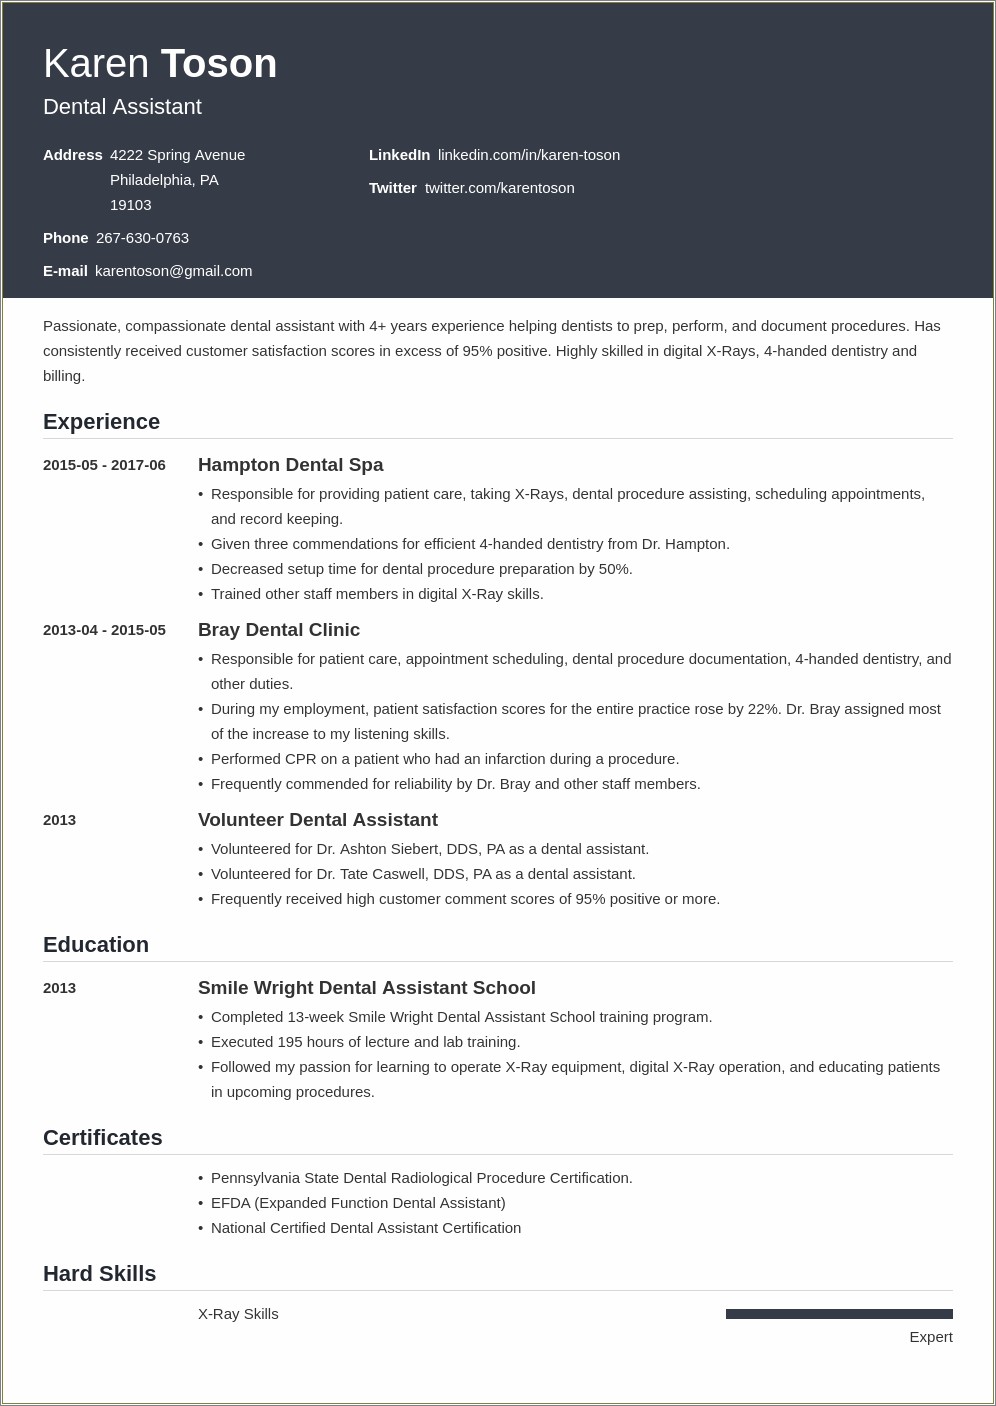 Resume Work Experience Dental Assistant Professional